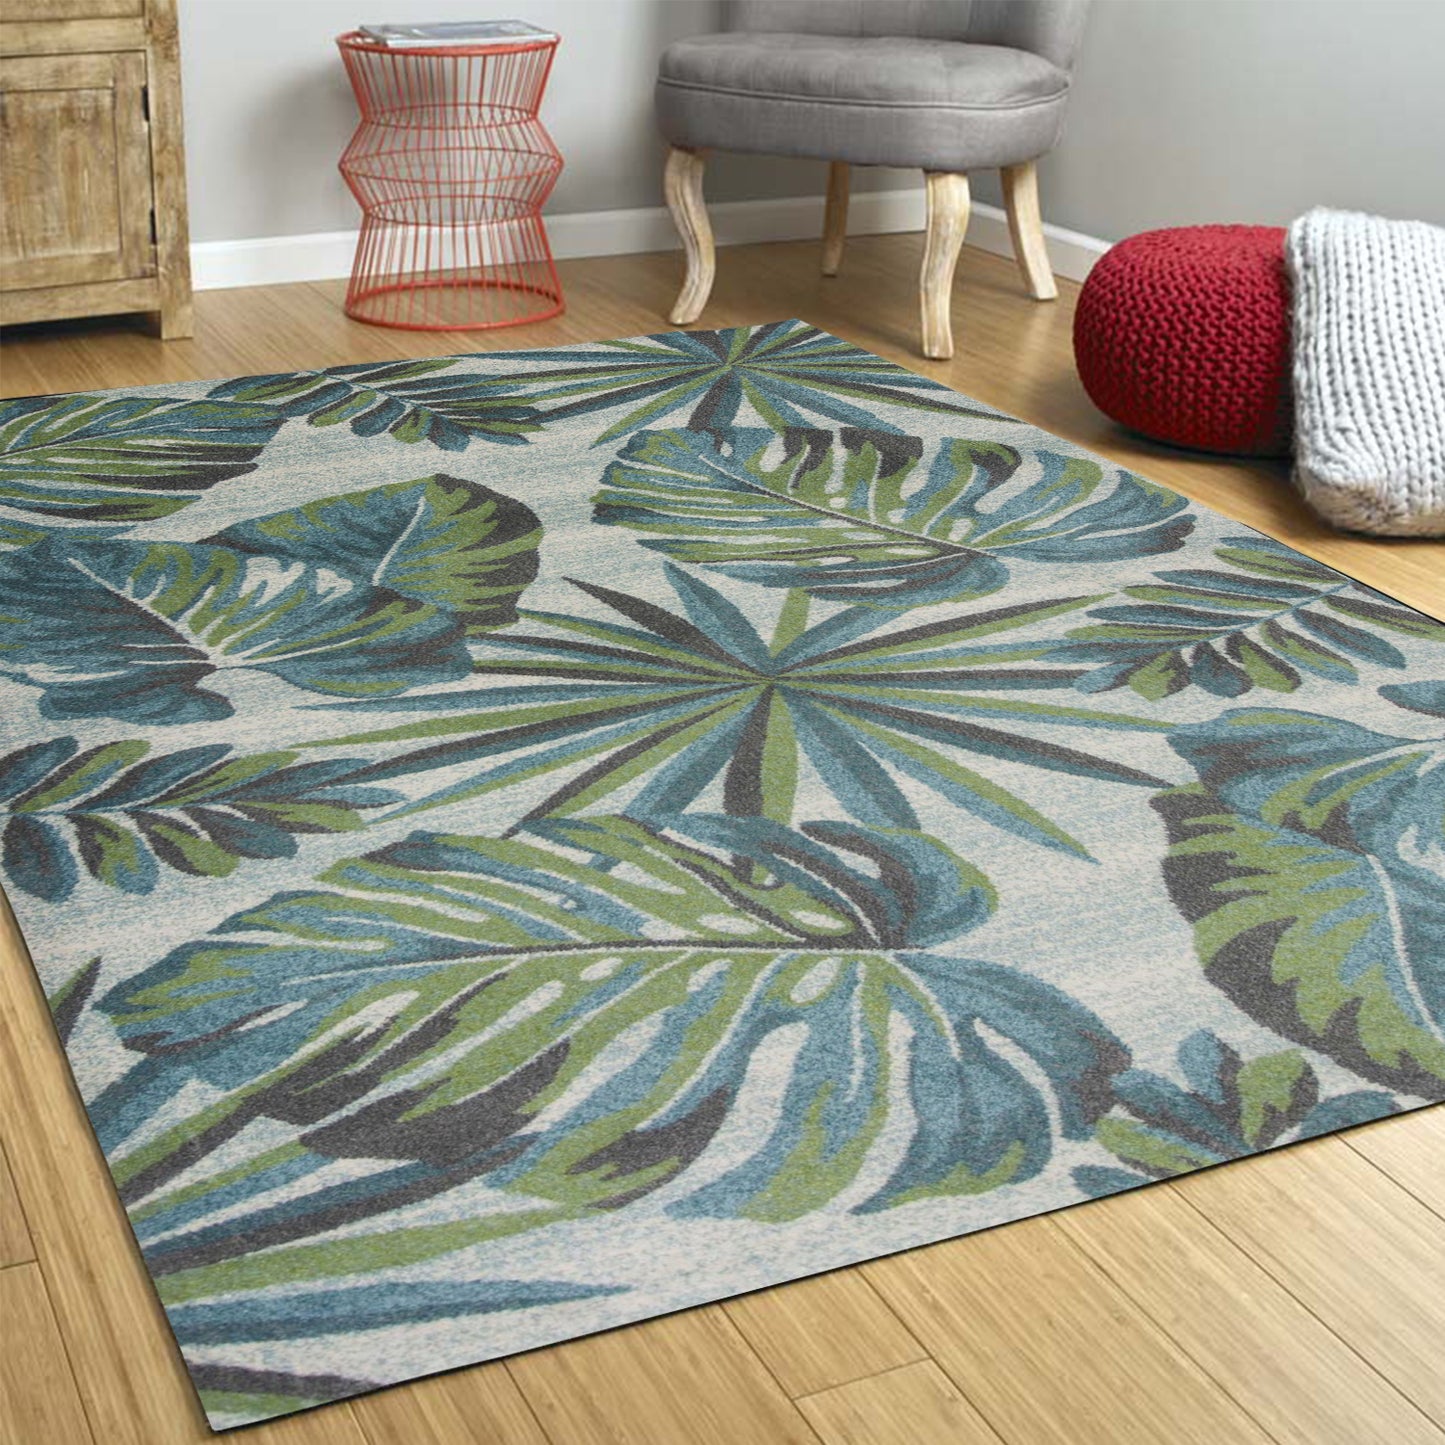 3' X 5' Teal and Ivory Tropical Floral Area Rug